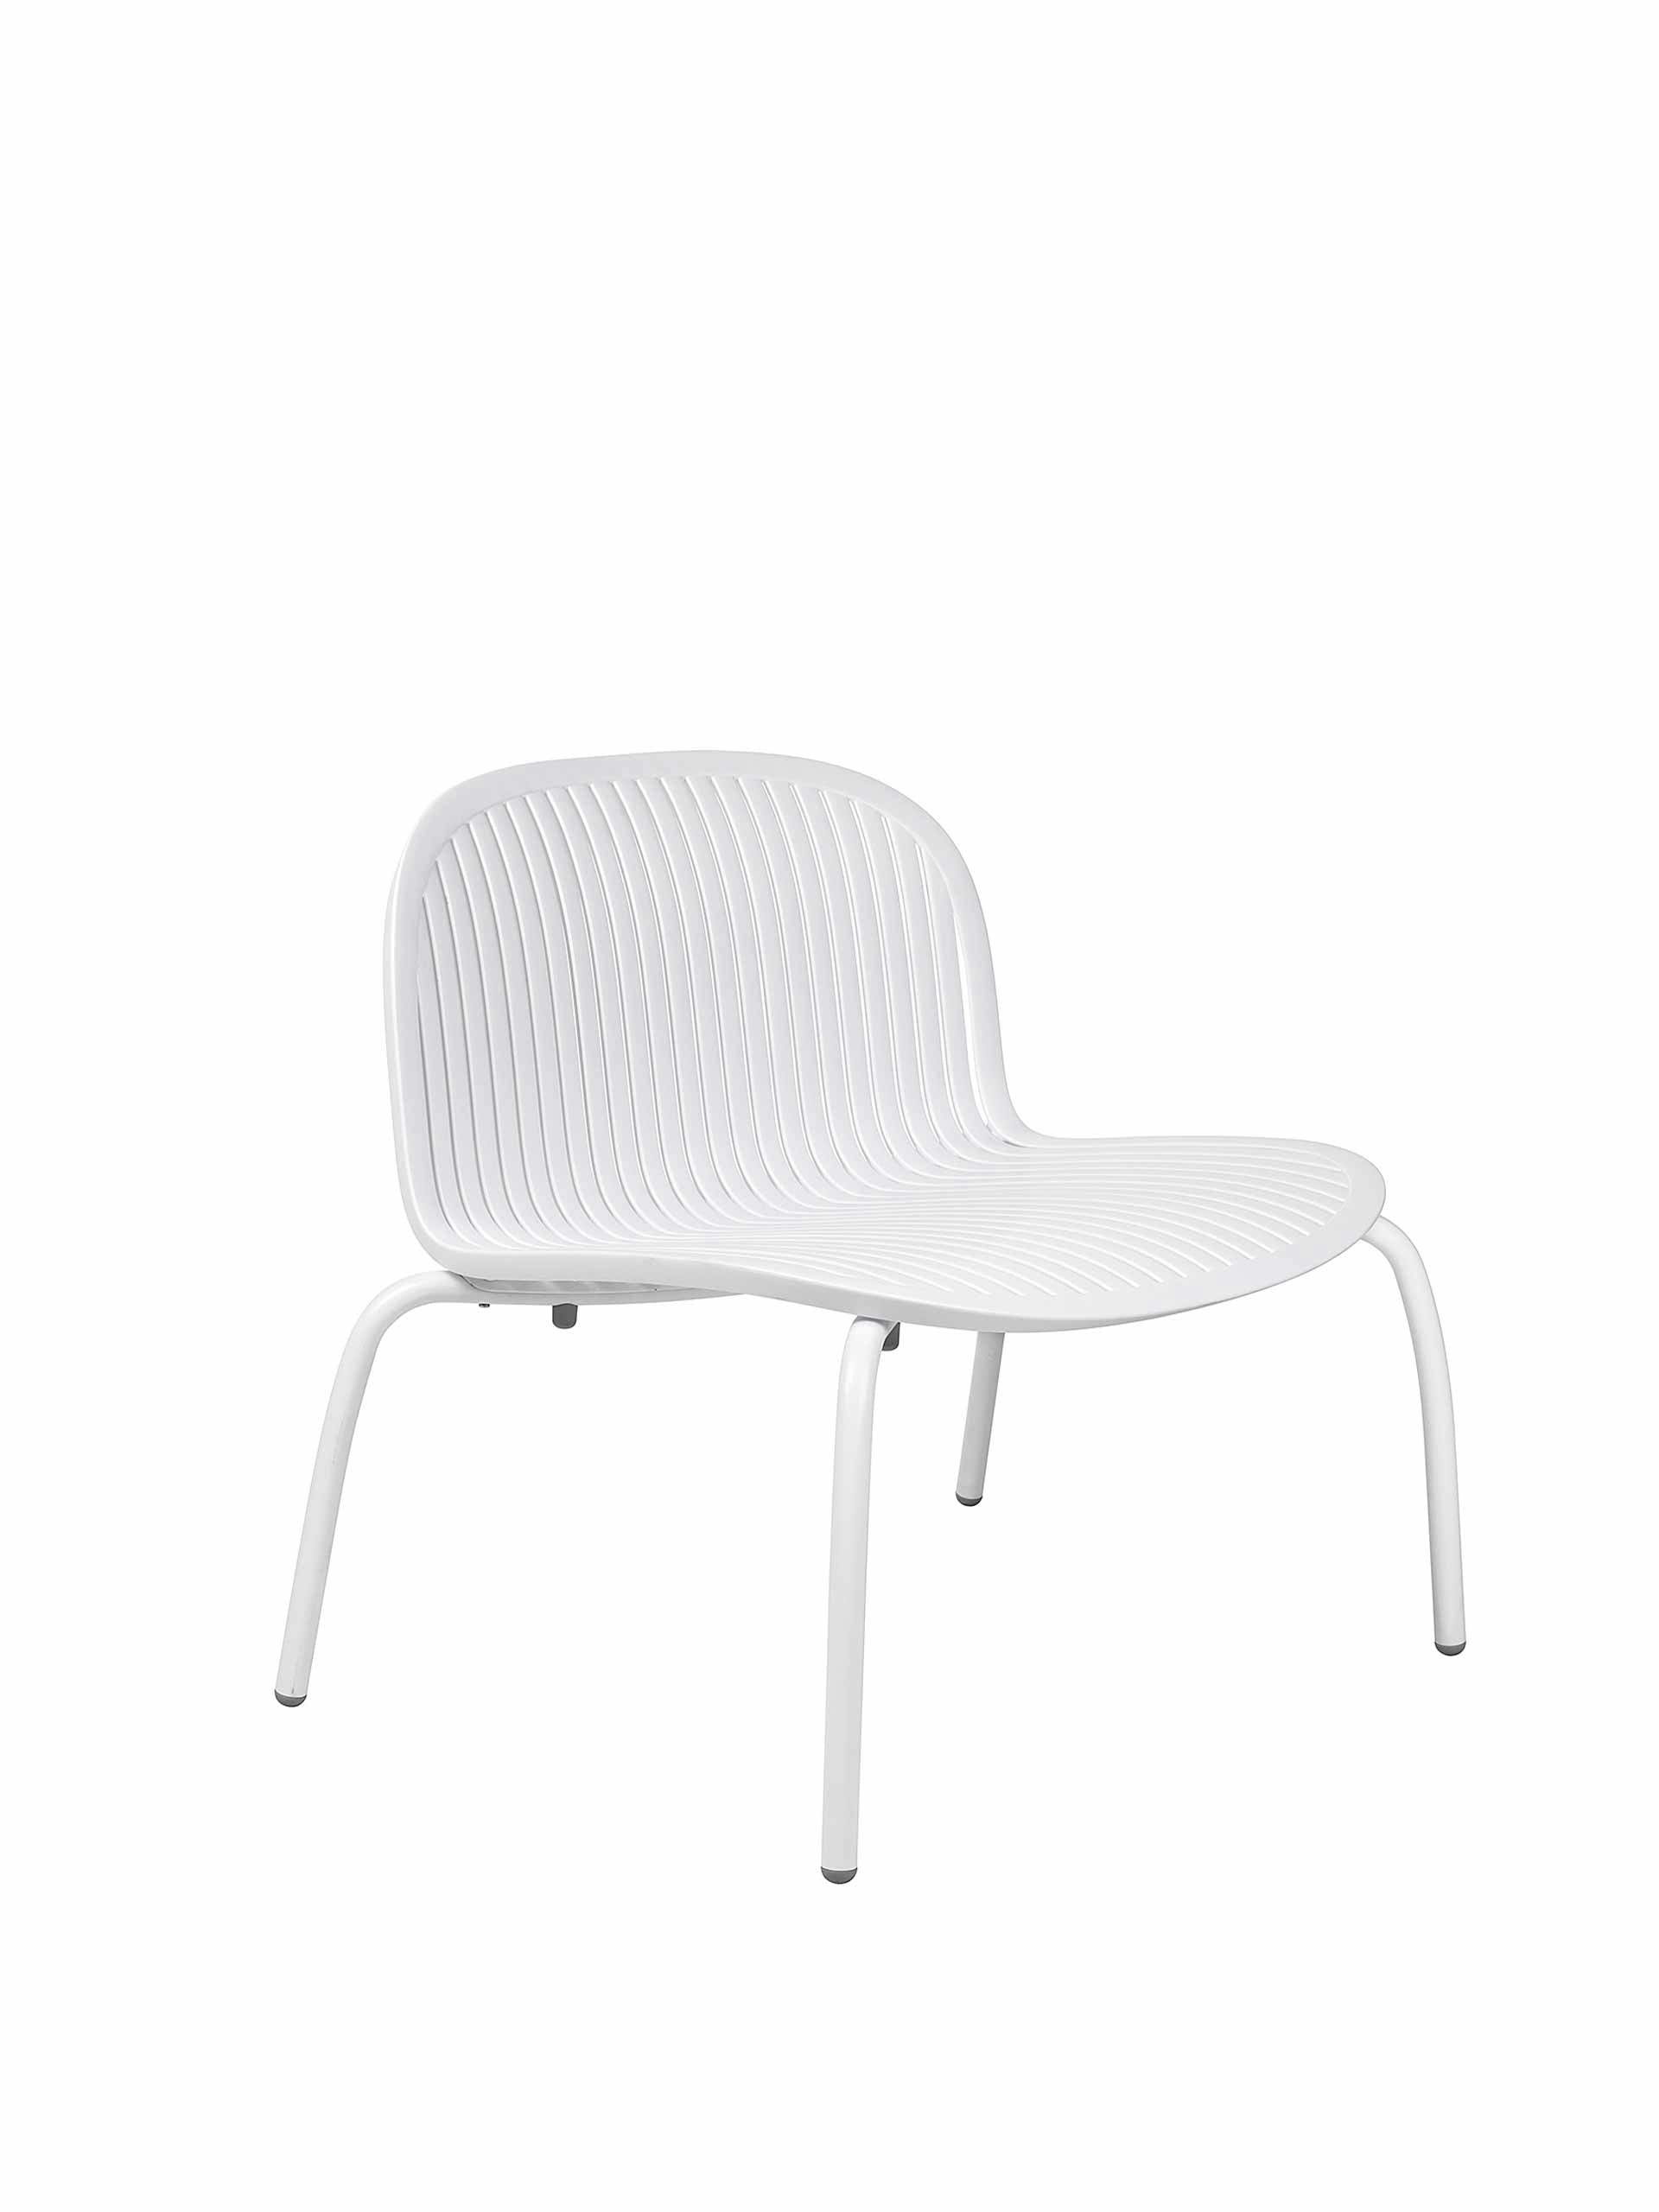 Wide white lounge chair